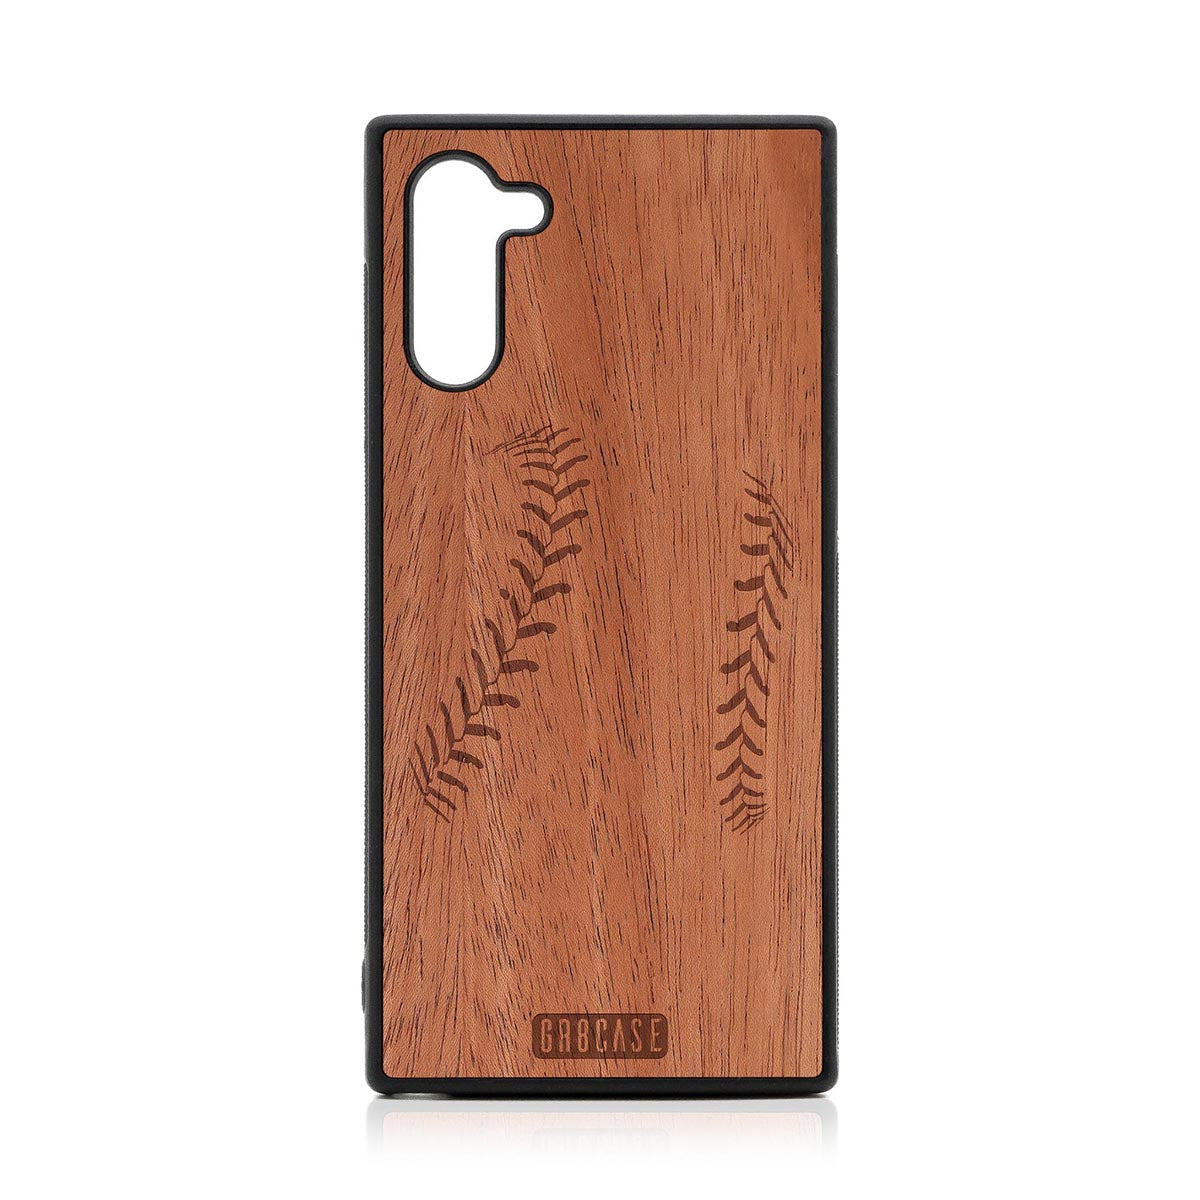 Baseball Stitches Design Wood Case For Samsung Galaxy Note 10 by GR8CASE